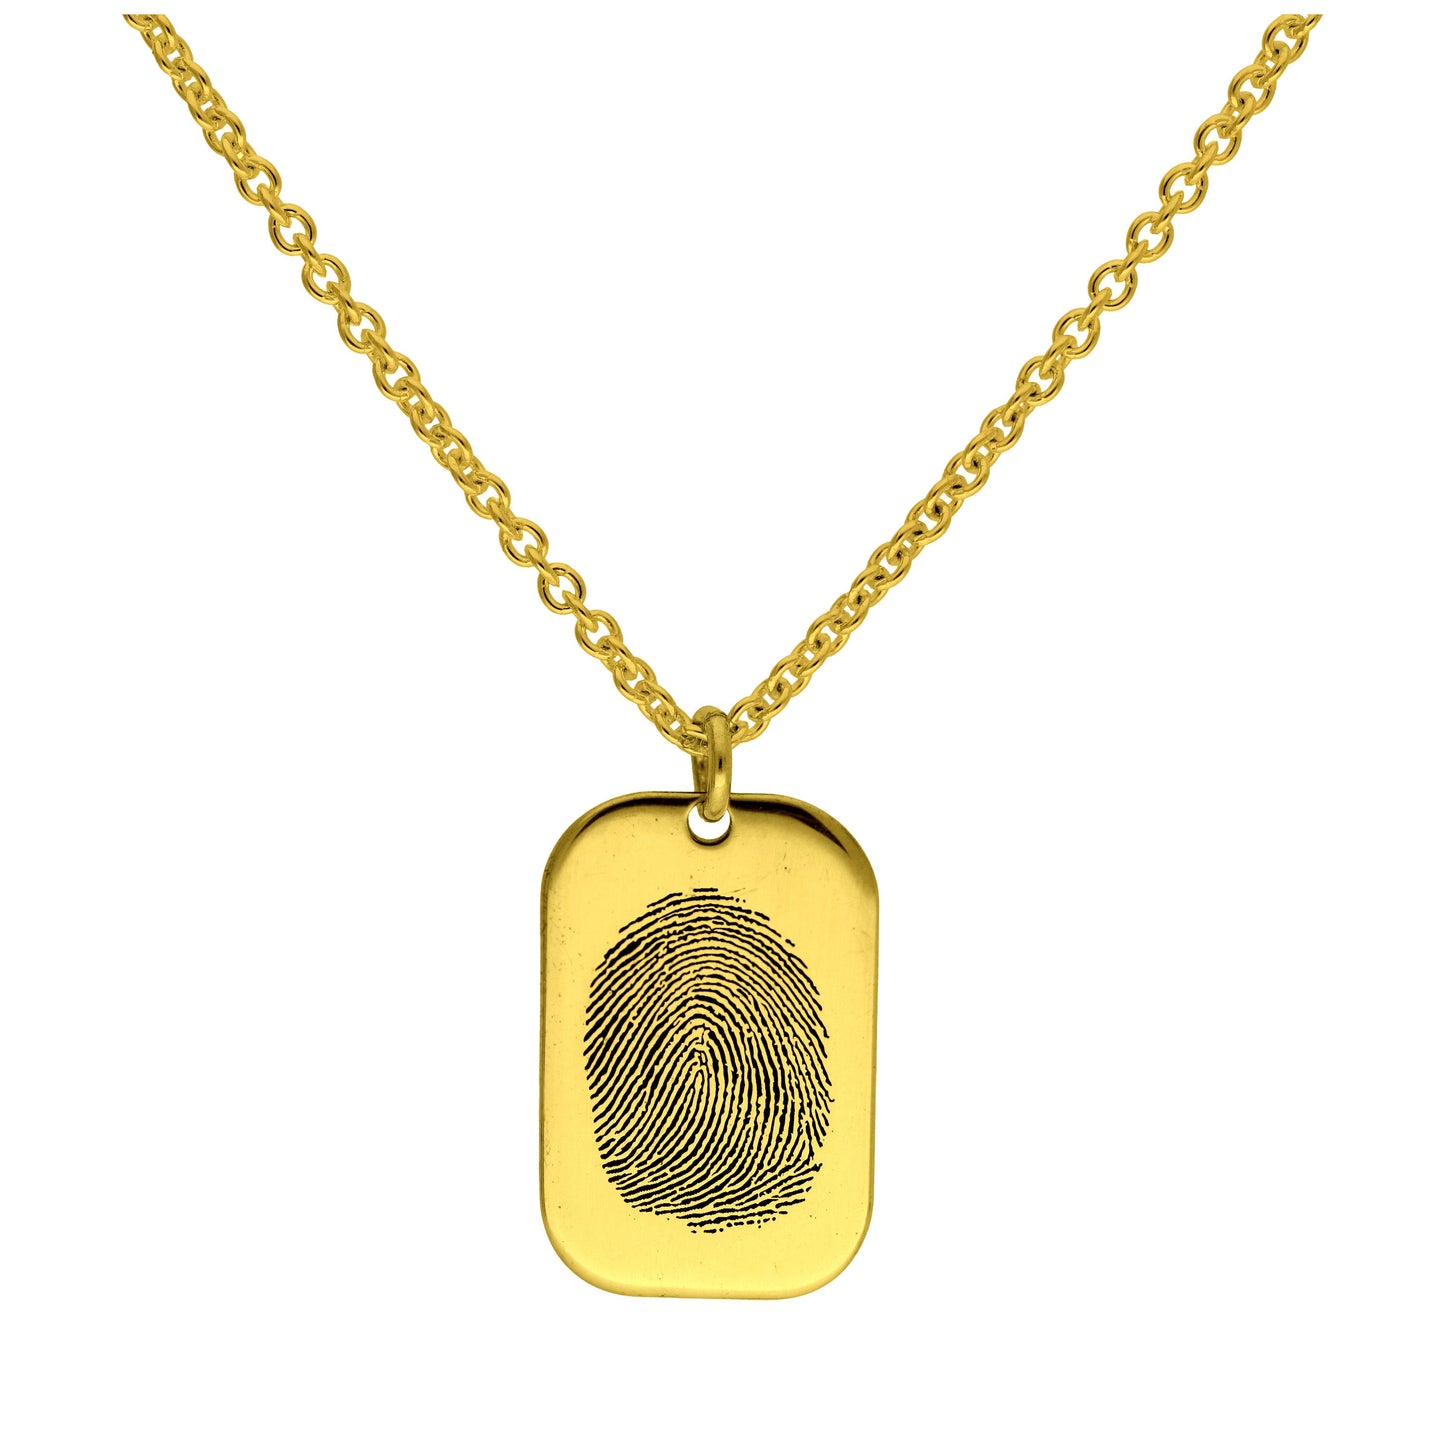 Bespoke Gold Plated Sterling Silver Dog Tag Fingerprint Necklace 16-24 Inches